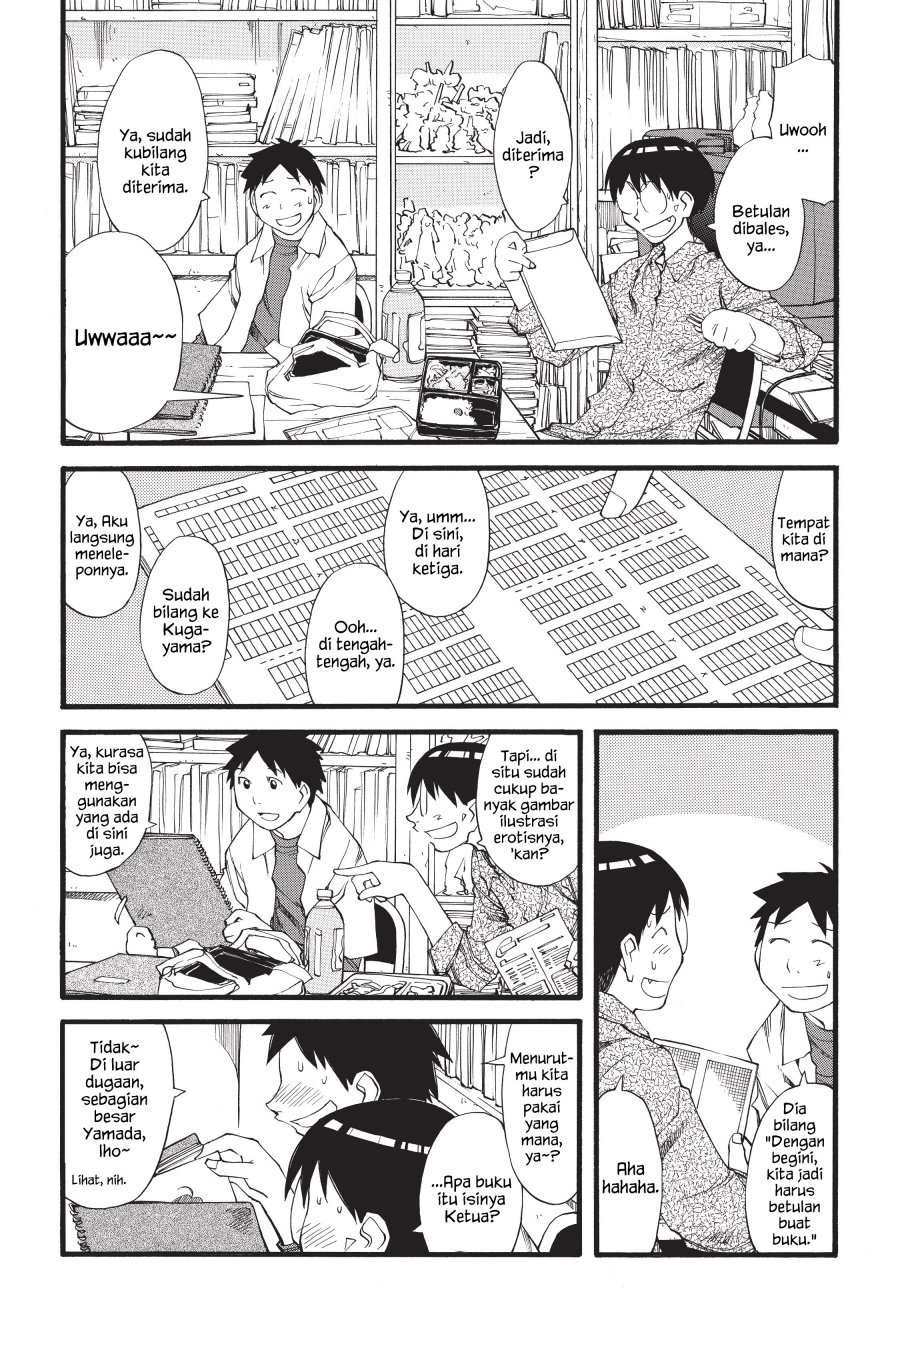 Genshiken – The Society for the Study of Modern Visual Culture Chapter 27 Image 2